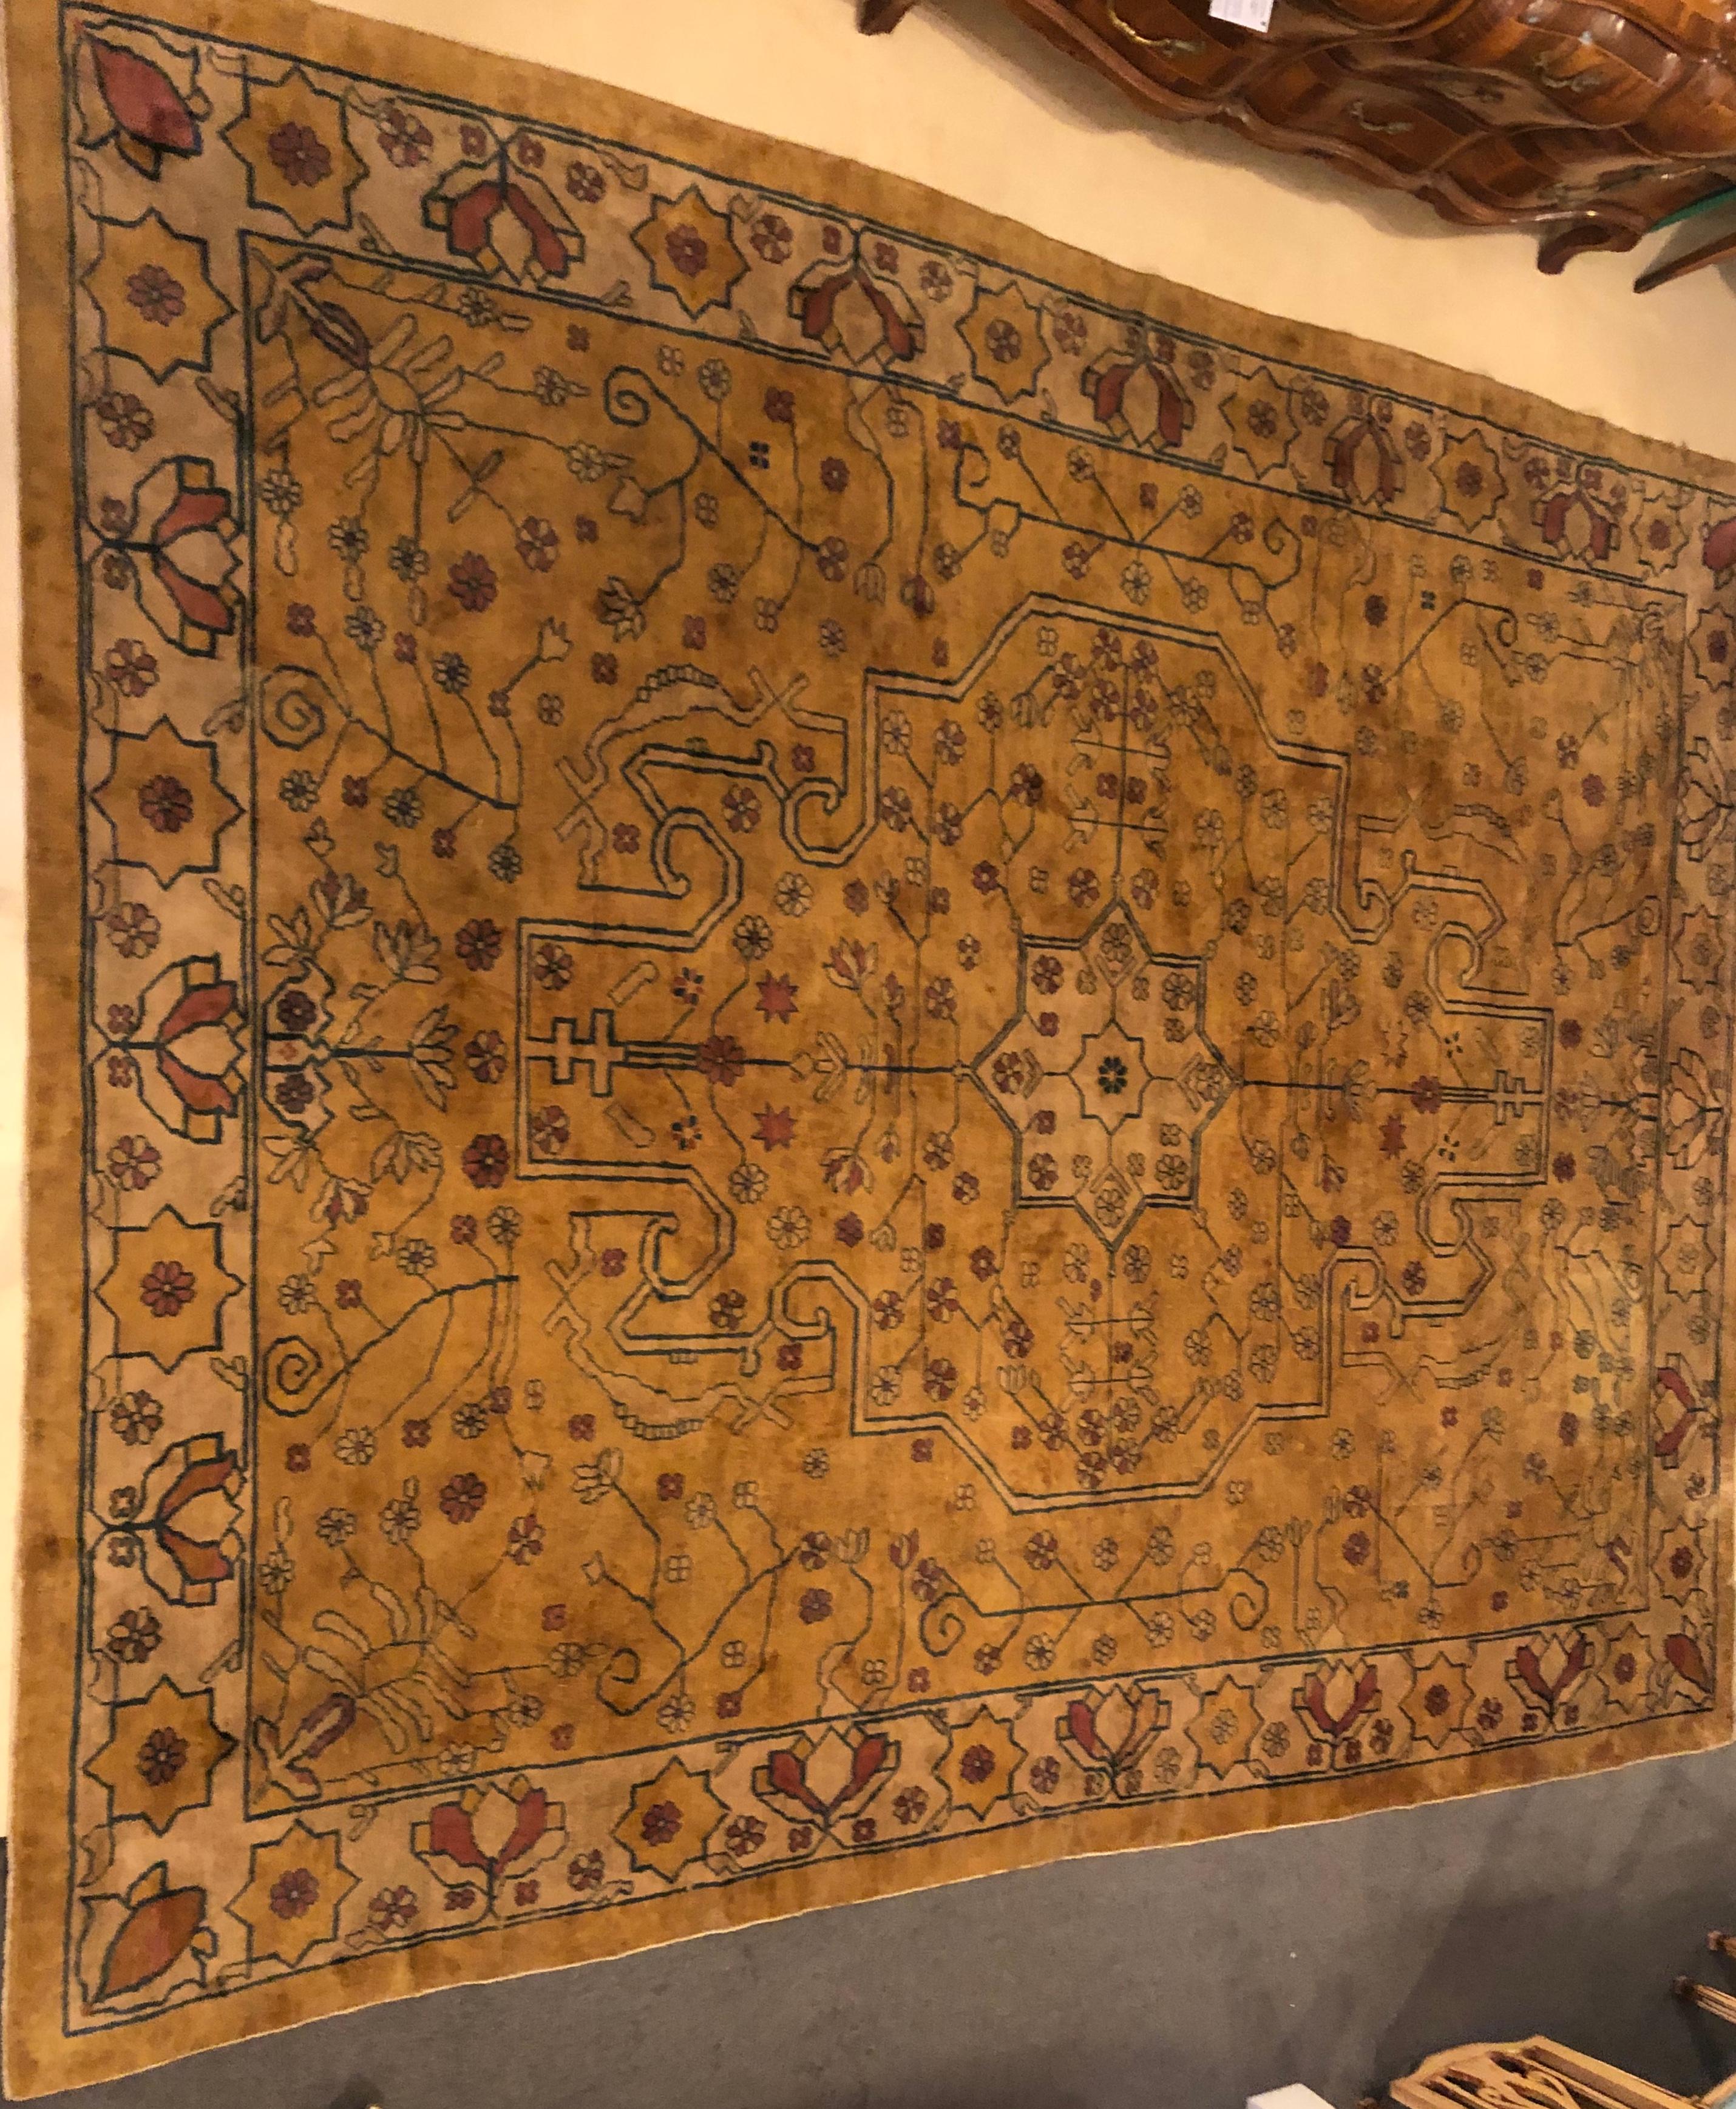 1920s Peking Chinese carpet / rug. Room sized. A fine example of tight handwoven carpets from the late 19th or very early 20th century weaved with 100 percent wool this carpet seems to shimmy as though it is silk. The vibrant bright colors are